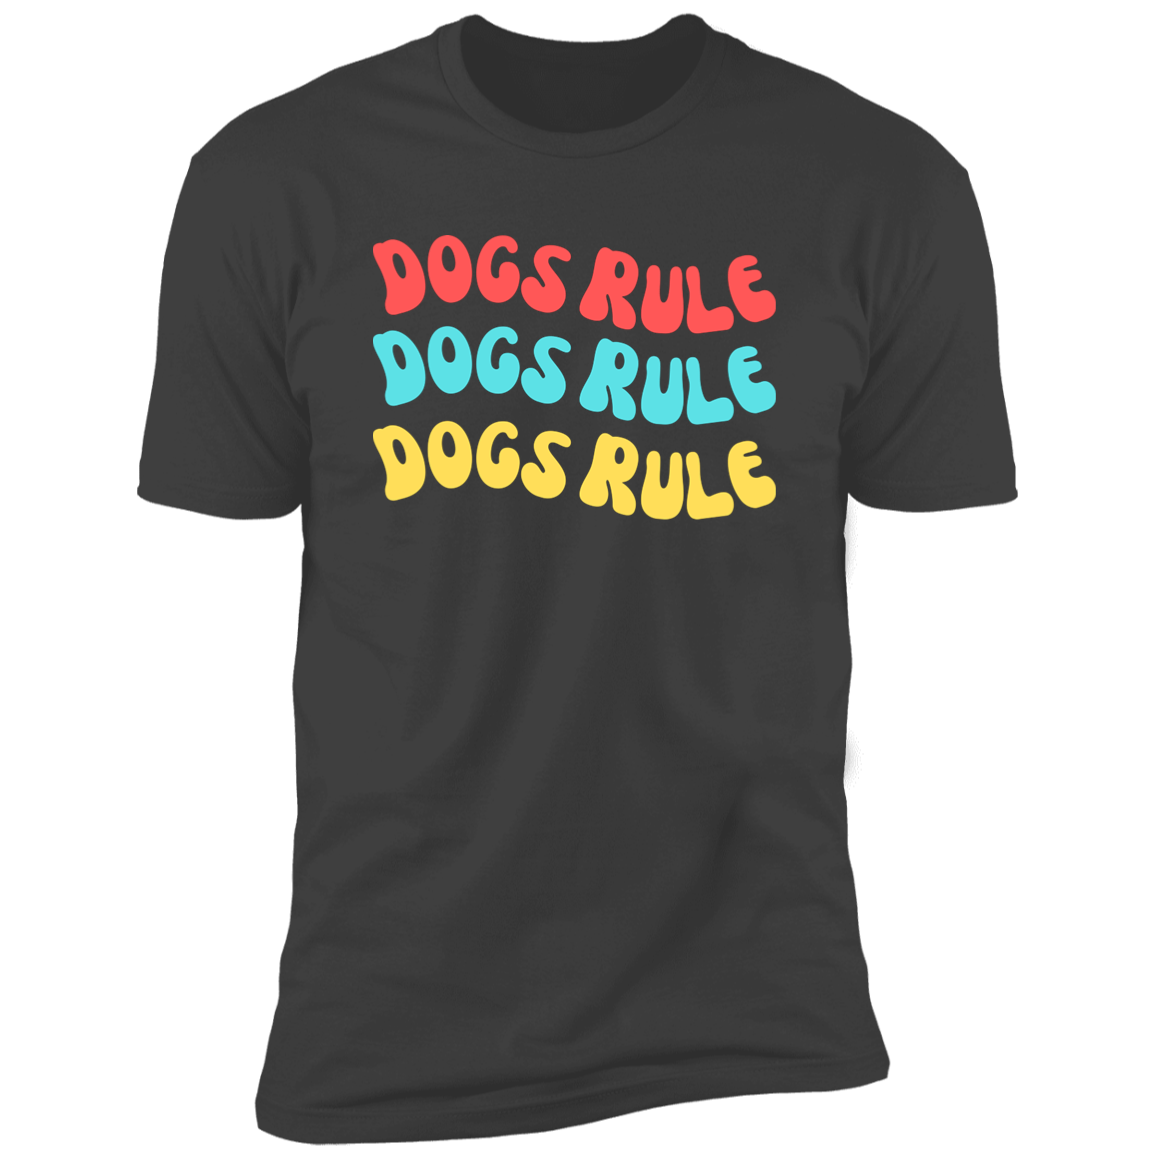 Dogs Rule Dog Shirt, dog shirt for humans, dog mom and dog dad shirt, in heavy metal gray